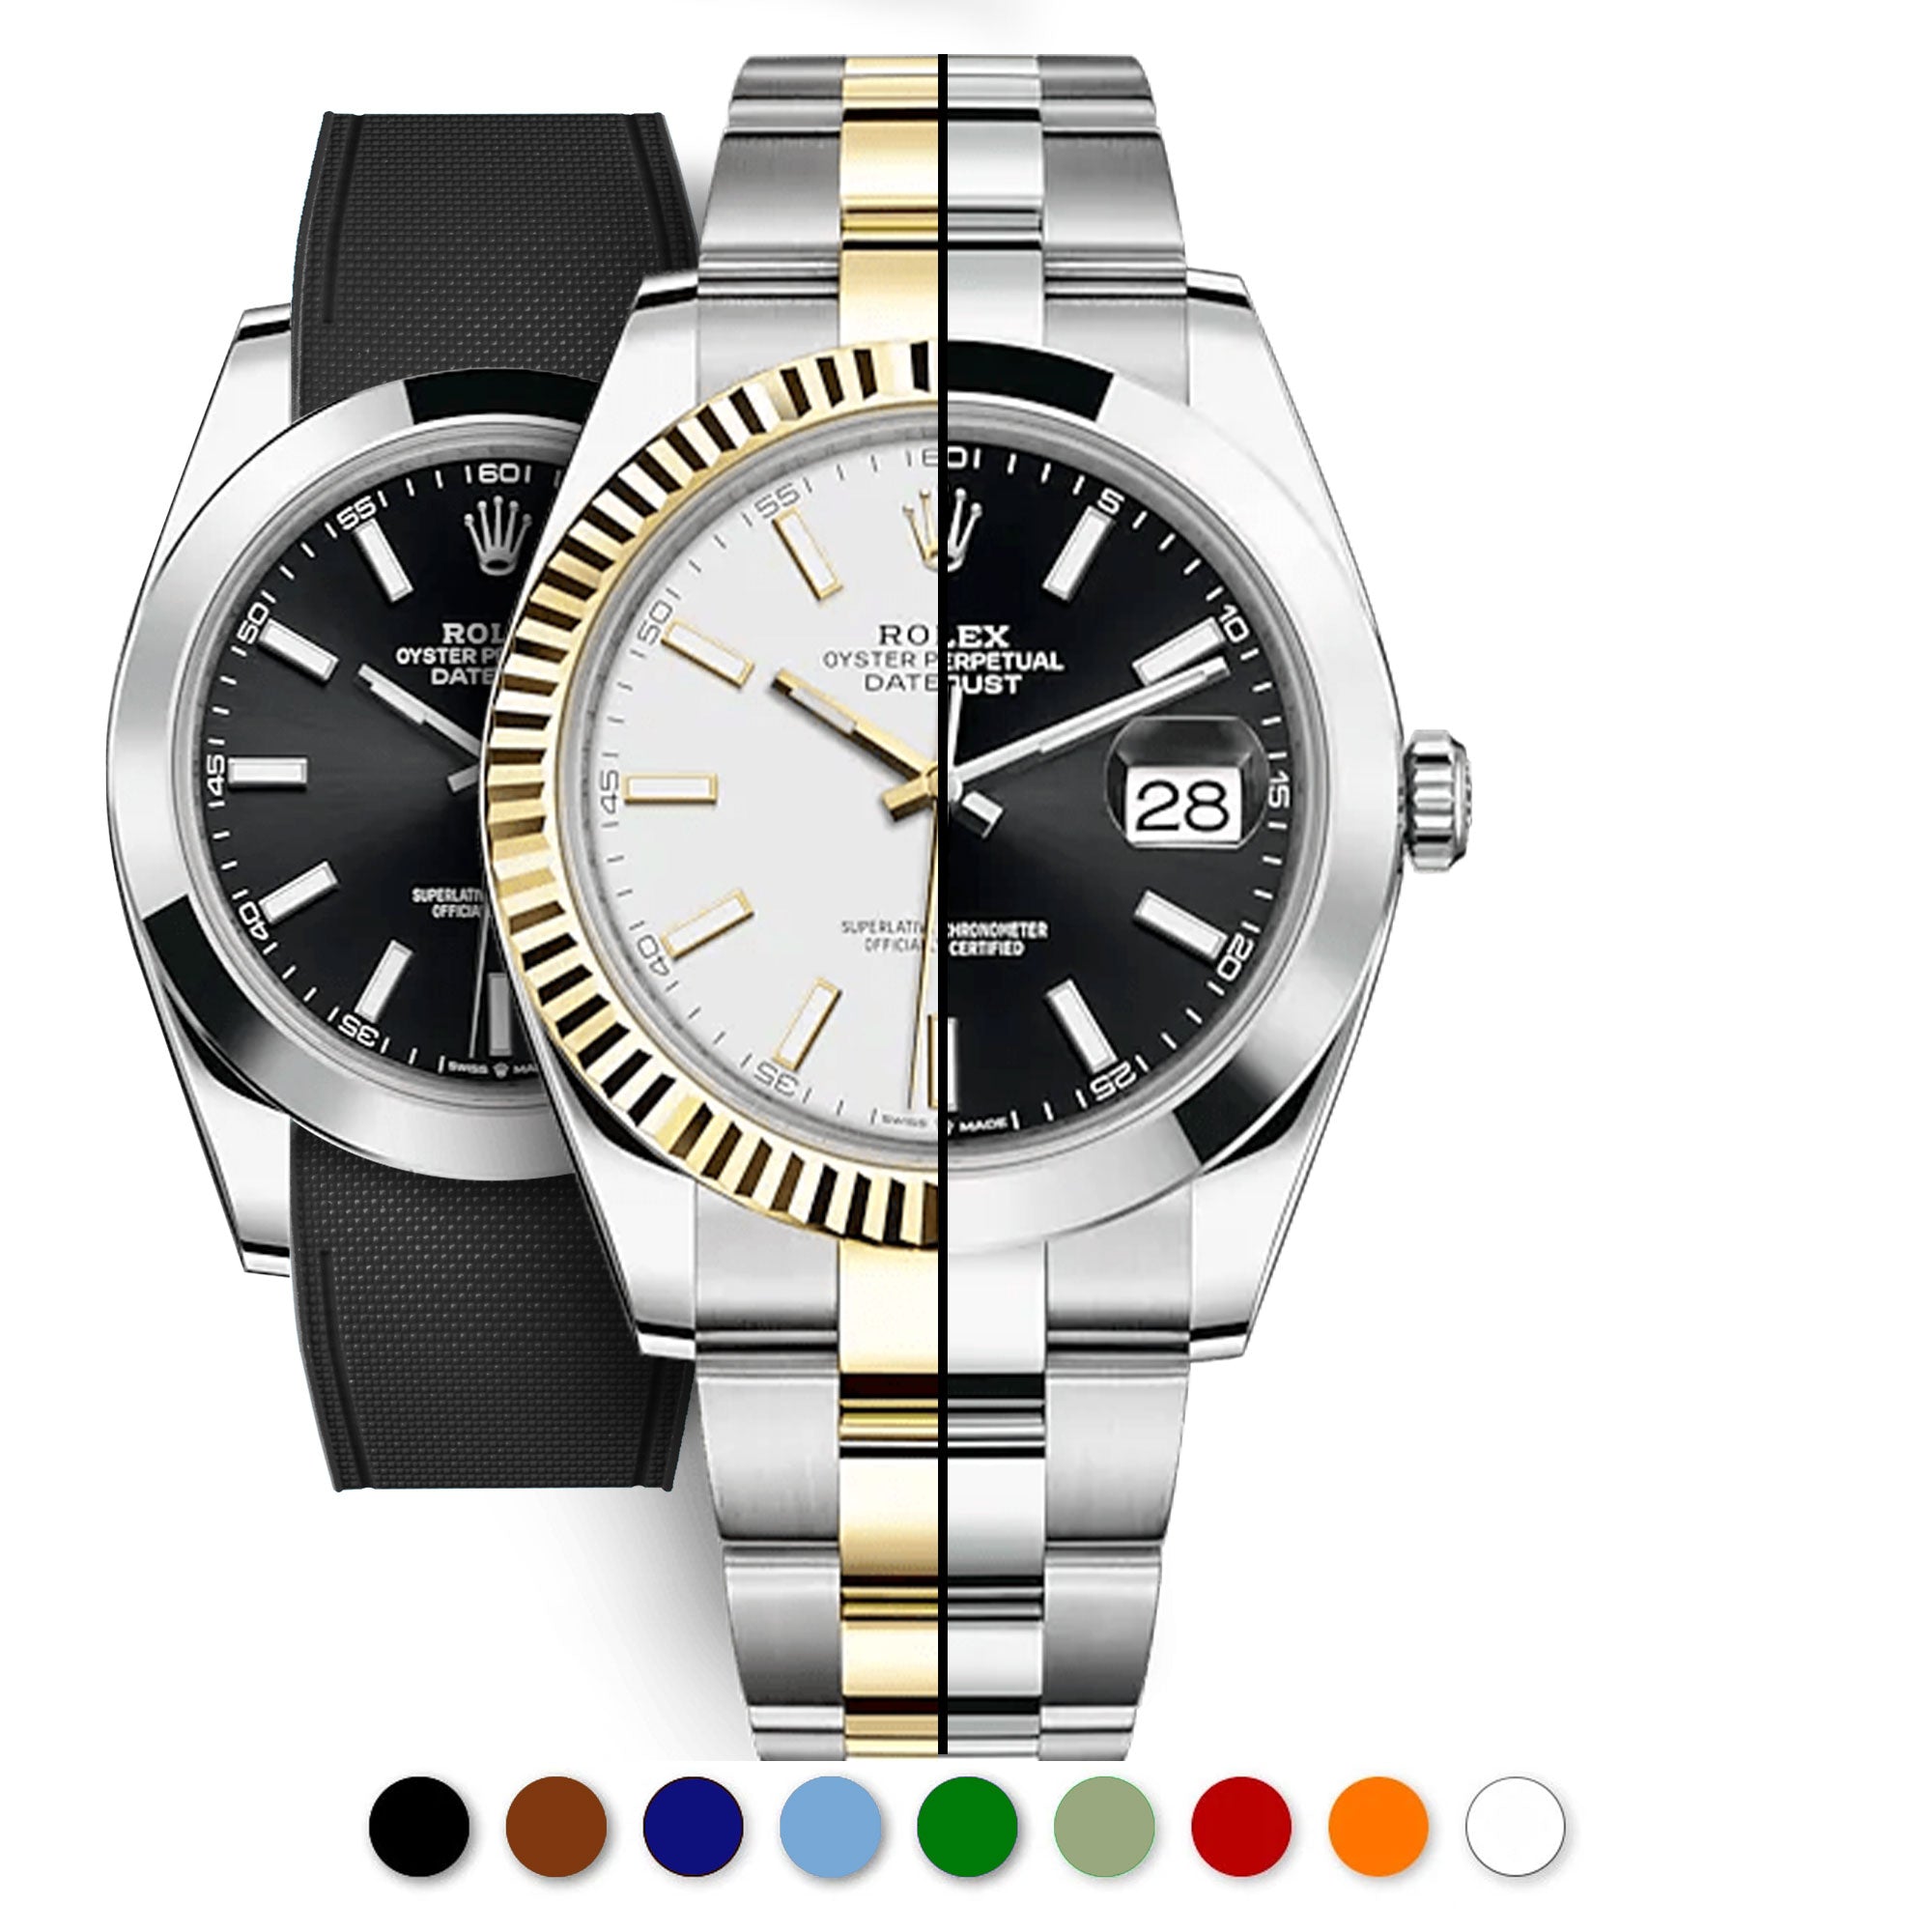 Rolex Datejust 41 Ultimate Buying Guide - Bob's Watches